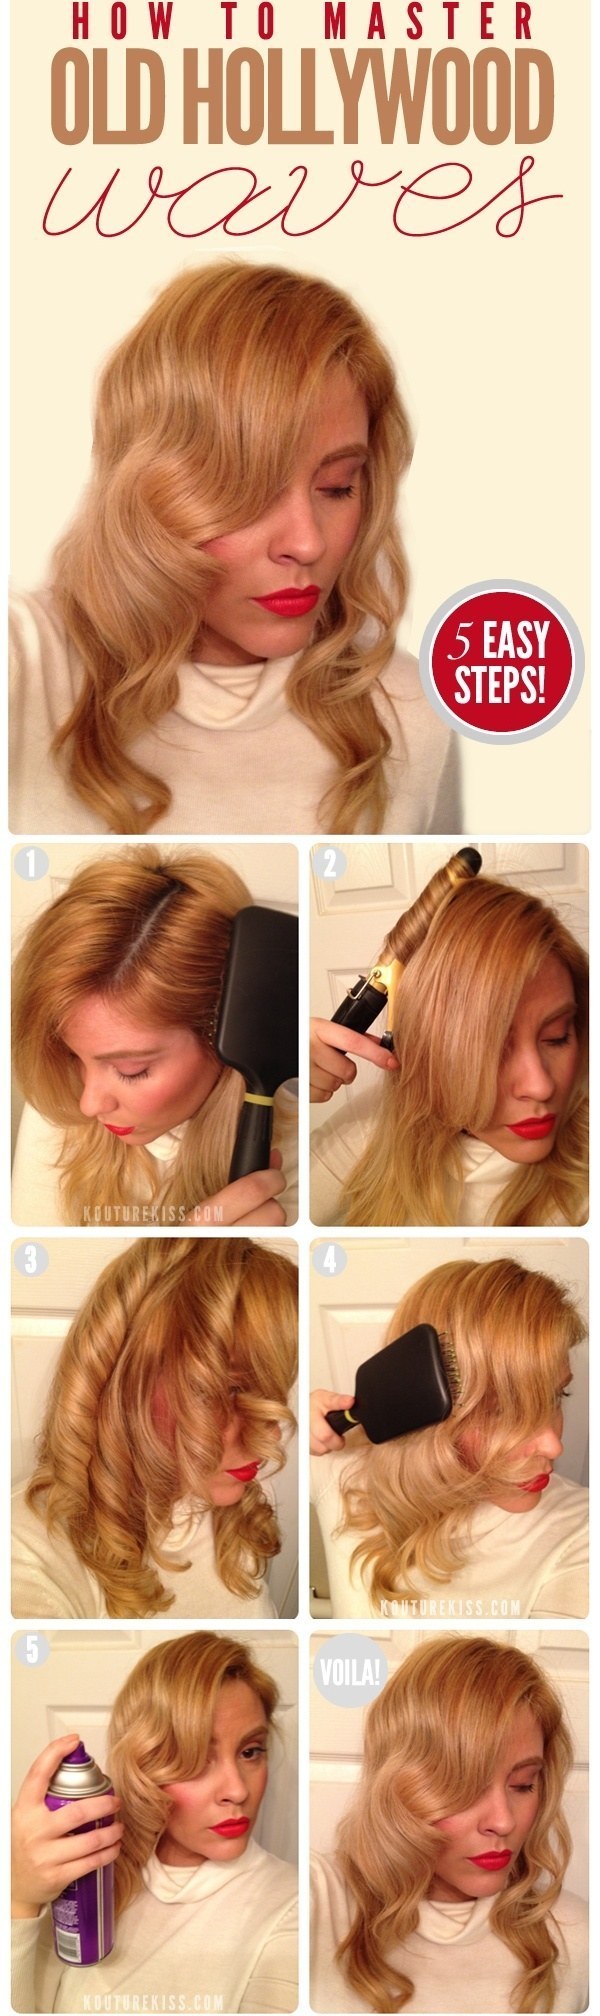 32 Vintage Hairstyle Tutorials You Should Not Miss Styles Weekly